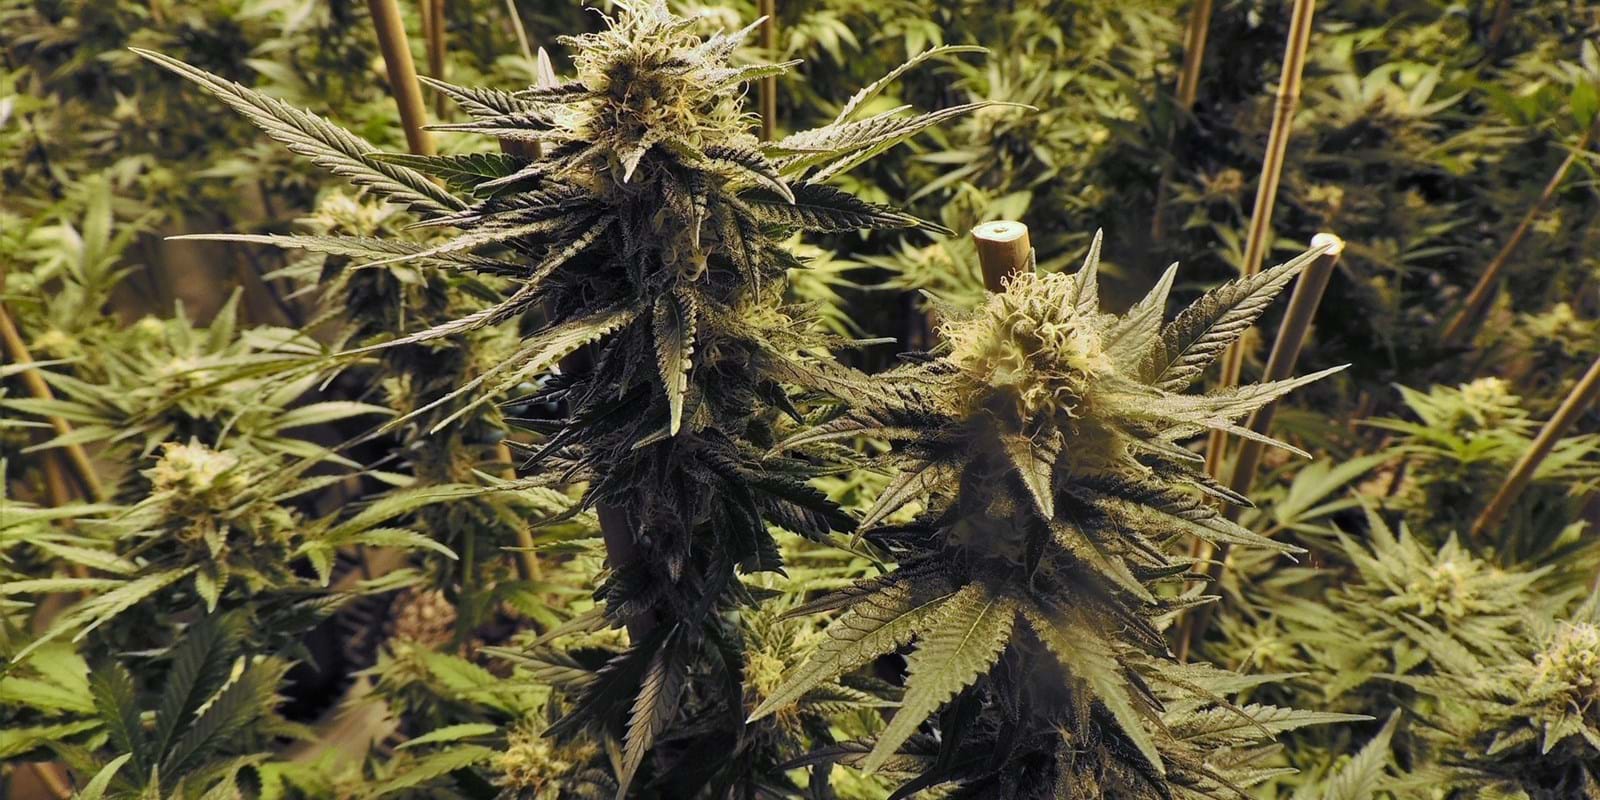 Cannabis cultivation at home: The Supreme Court will hear the case in September 2022